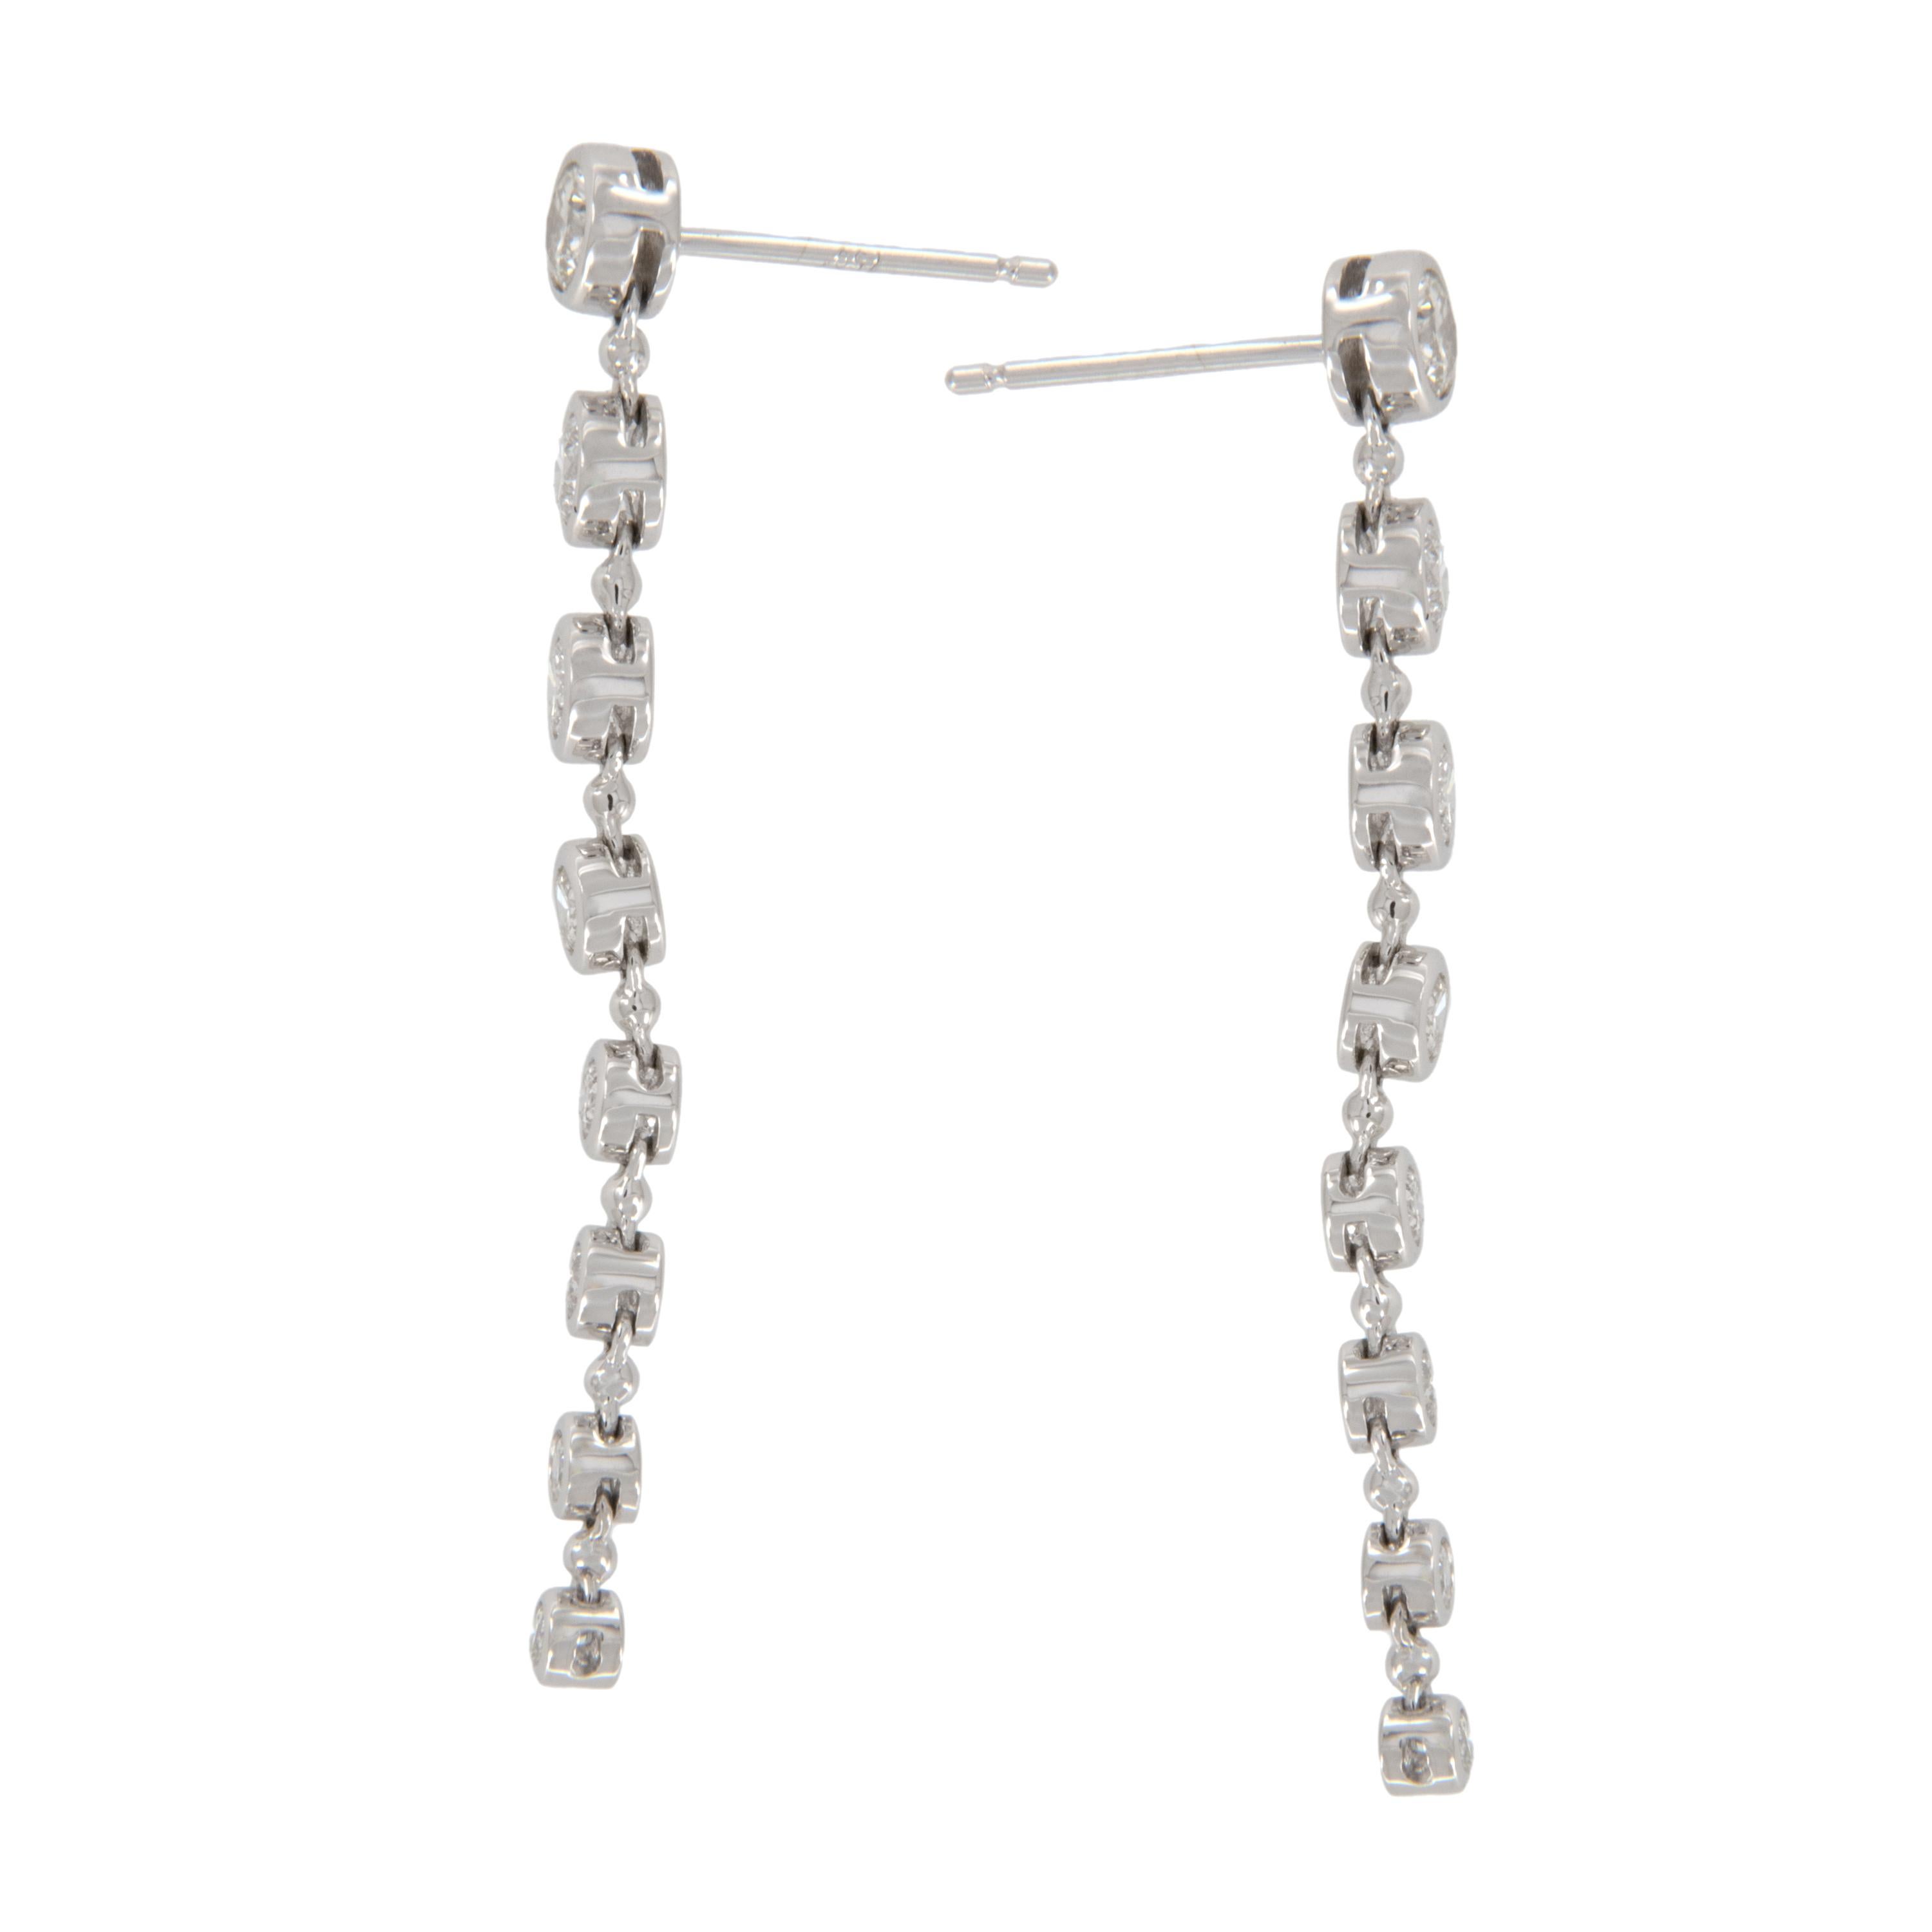 The understated beauty of these breathtaking 18 karat white gold diamond dangle earrings with 16 RBC diamonds = 1.24 Cttw G - VS diamonds bezel set in decrescendo fashion is unsurpassed! Picture perfect being  1-5/8